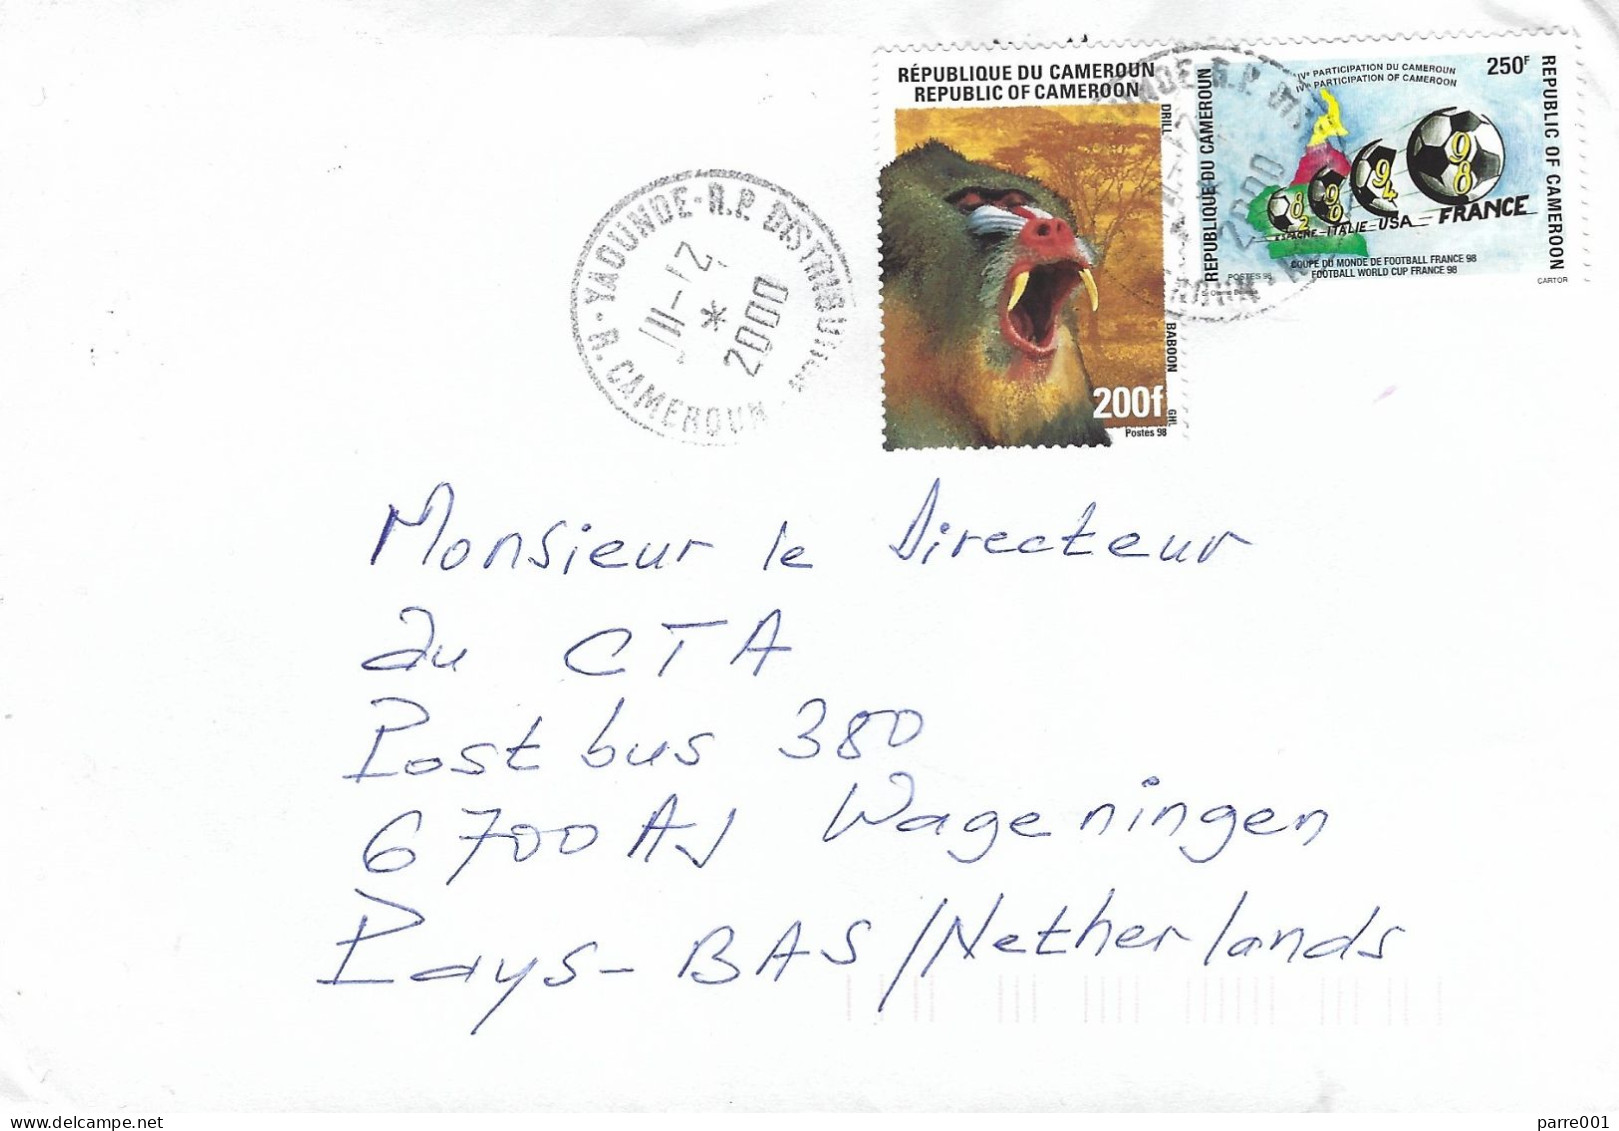 Cameroon Cameroun 2000 Yaounde World Cup Football France 250f Mandrill Monkey Cover - 1998 – France